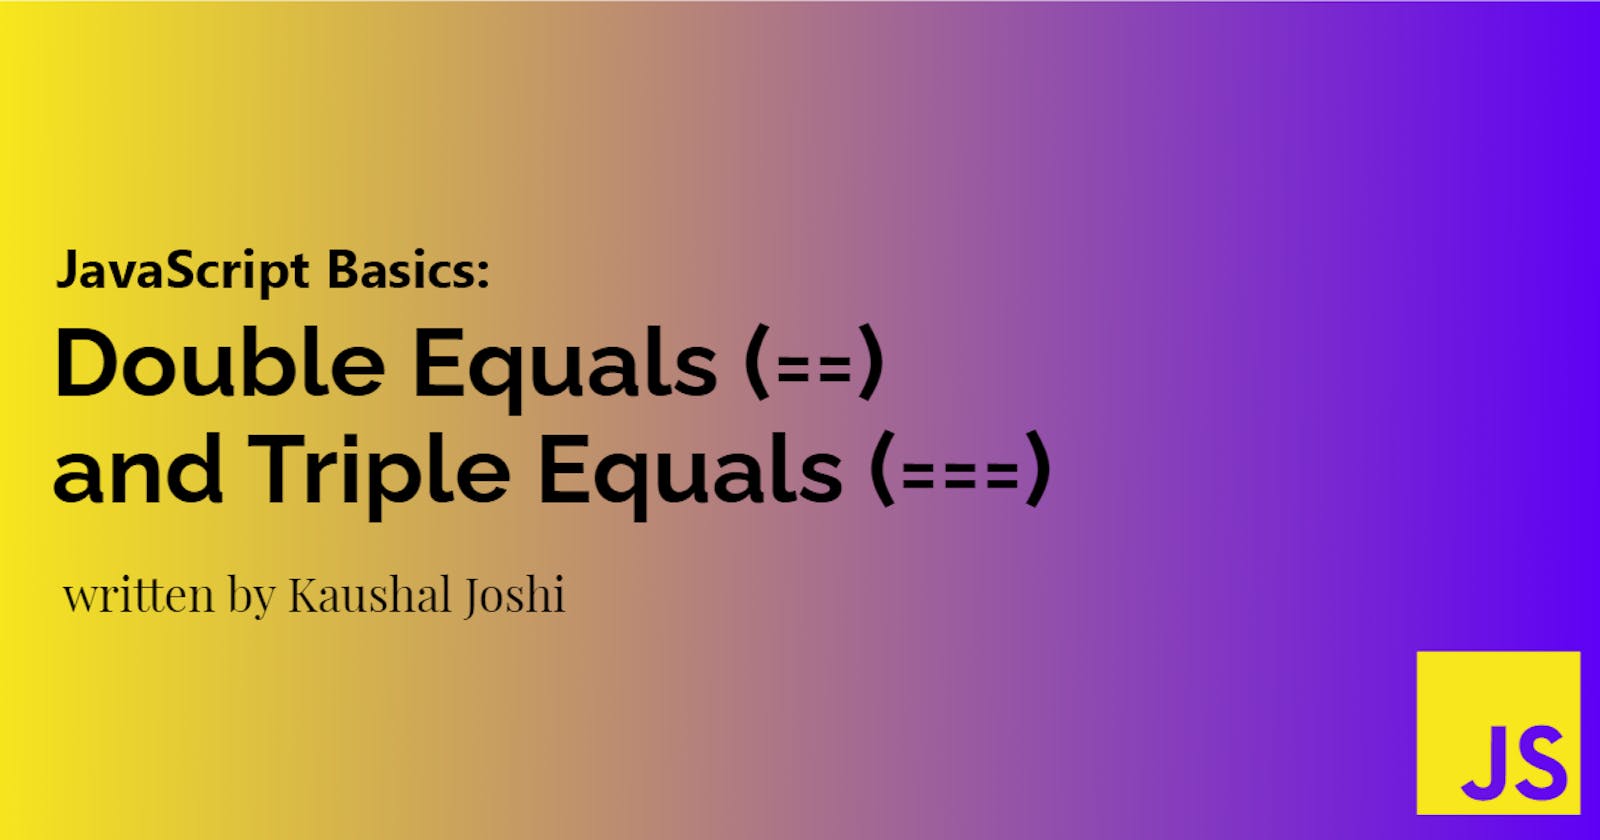 JavaScript Basics: Double Equals (==) and Triple Equals (===)